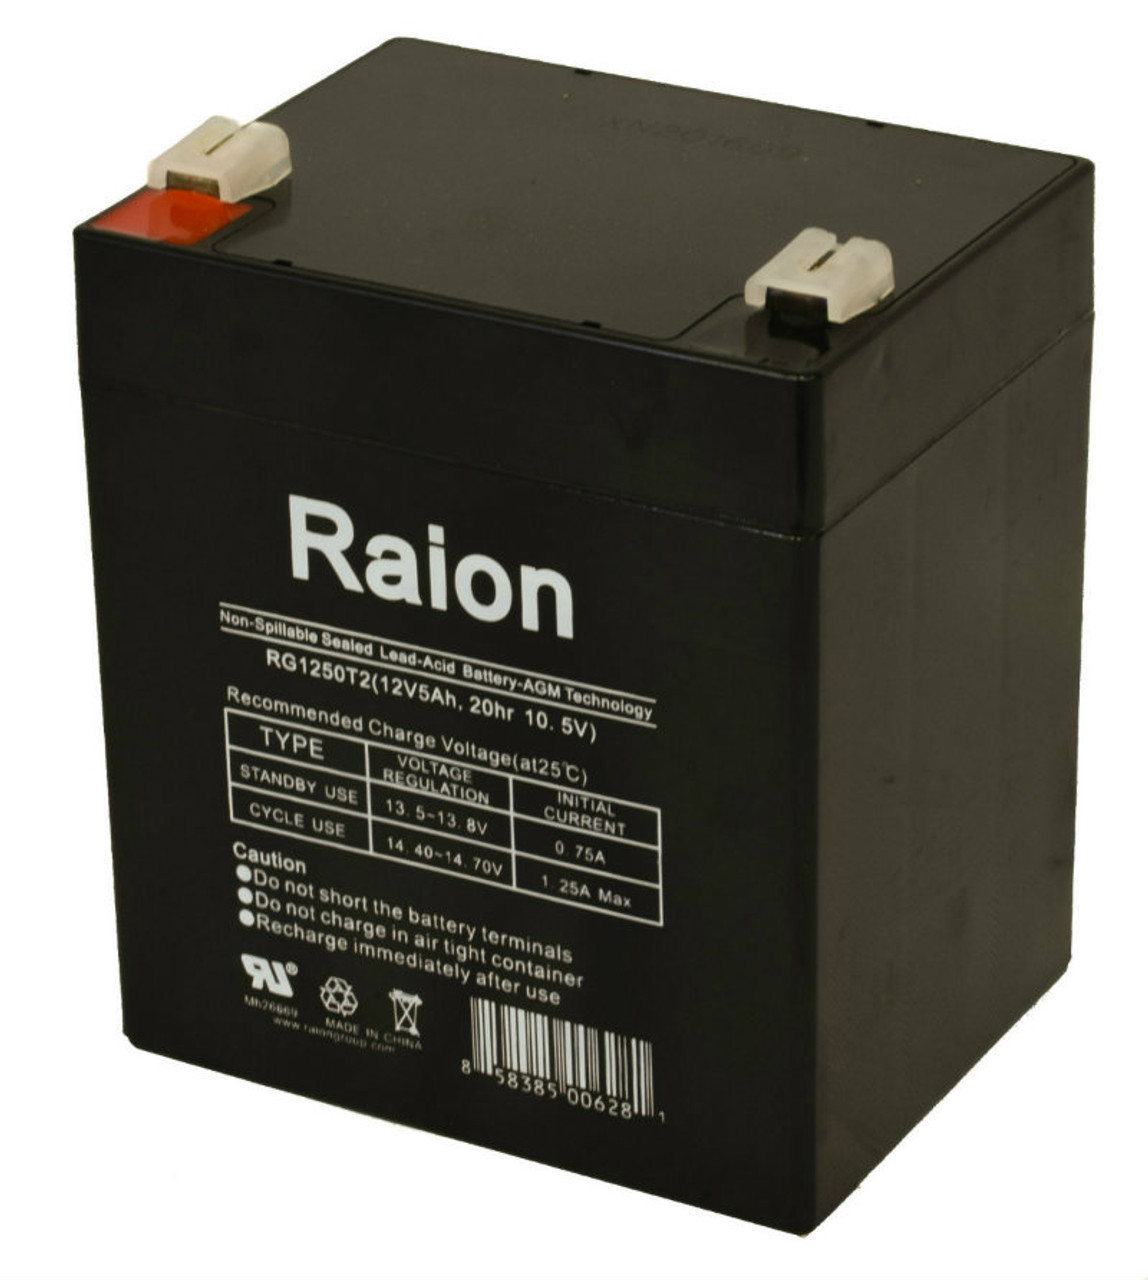 Raion Power RG1250T2 Replacement Battery for Duramp NP5-12